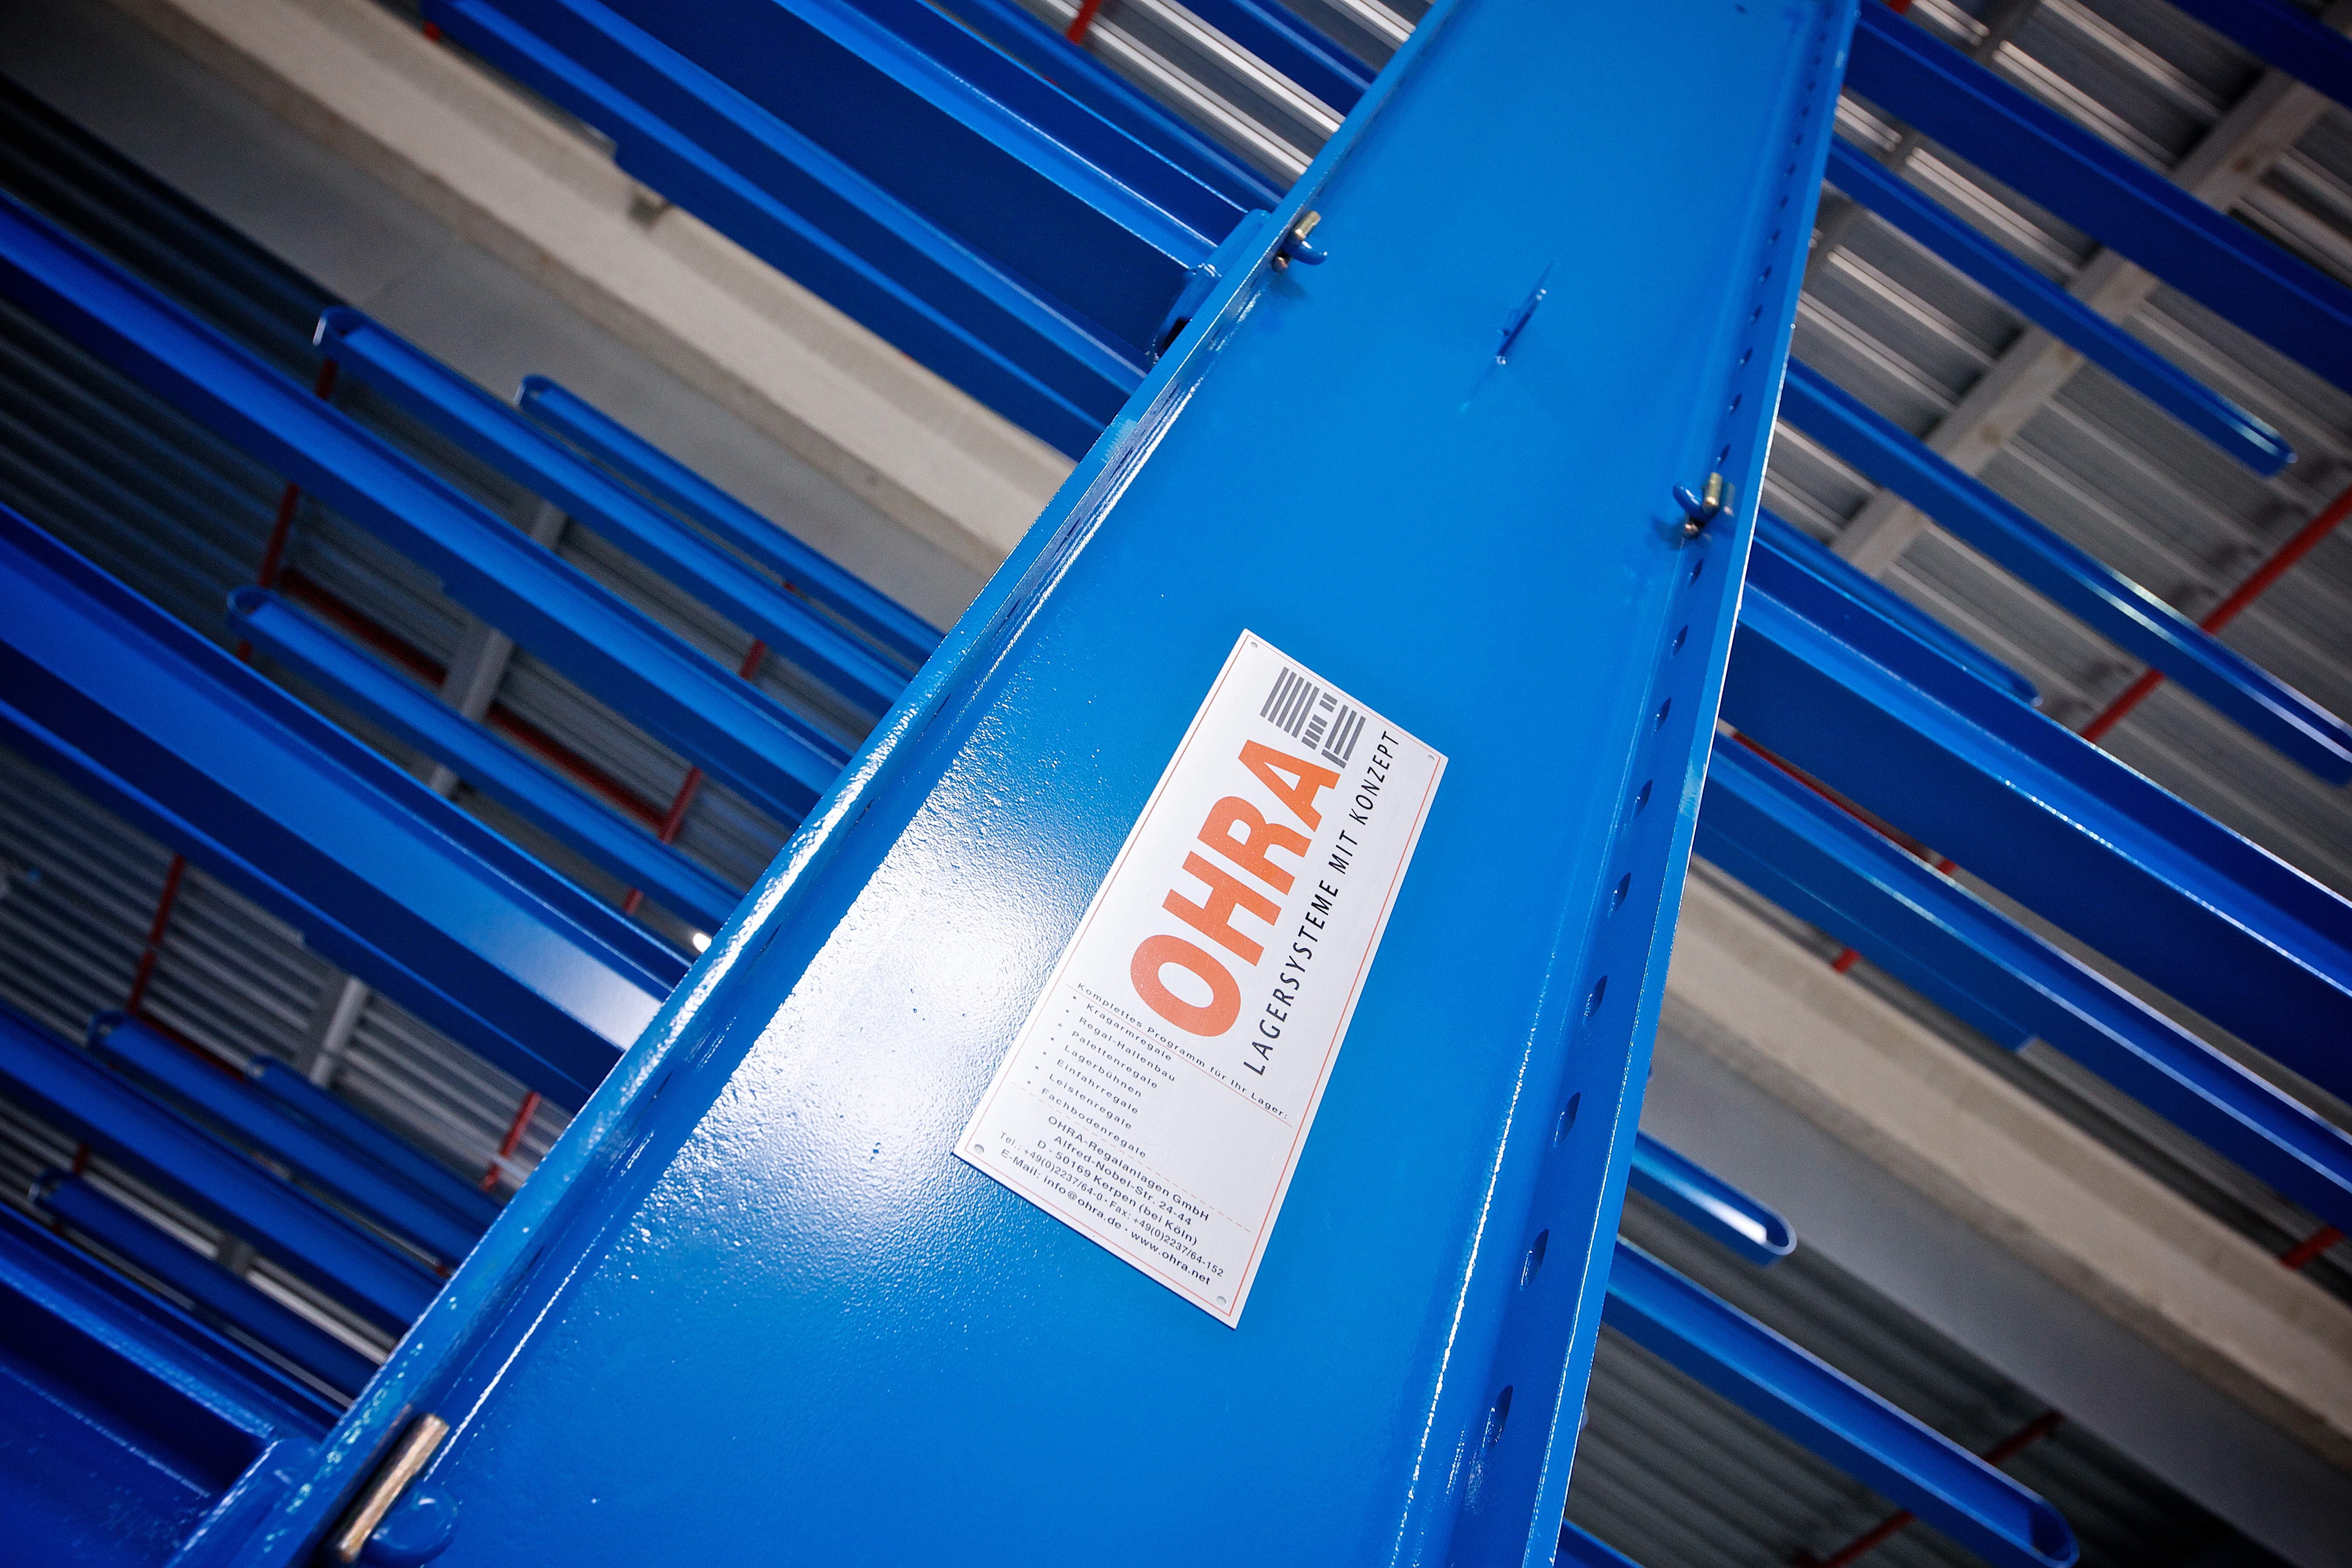 [Translate "Ireland"] Cantilever racking system by OHRA